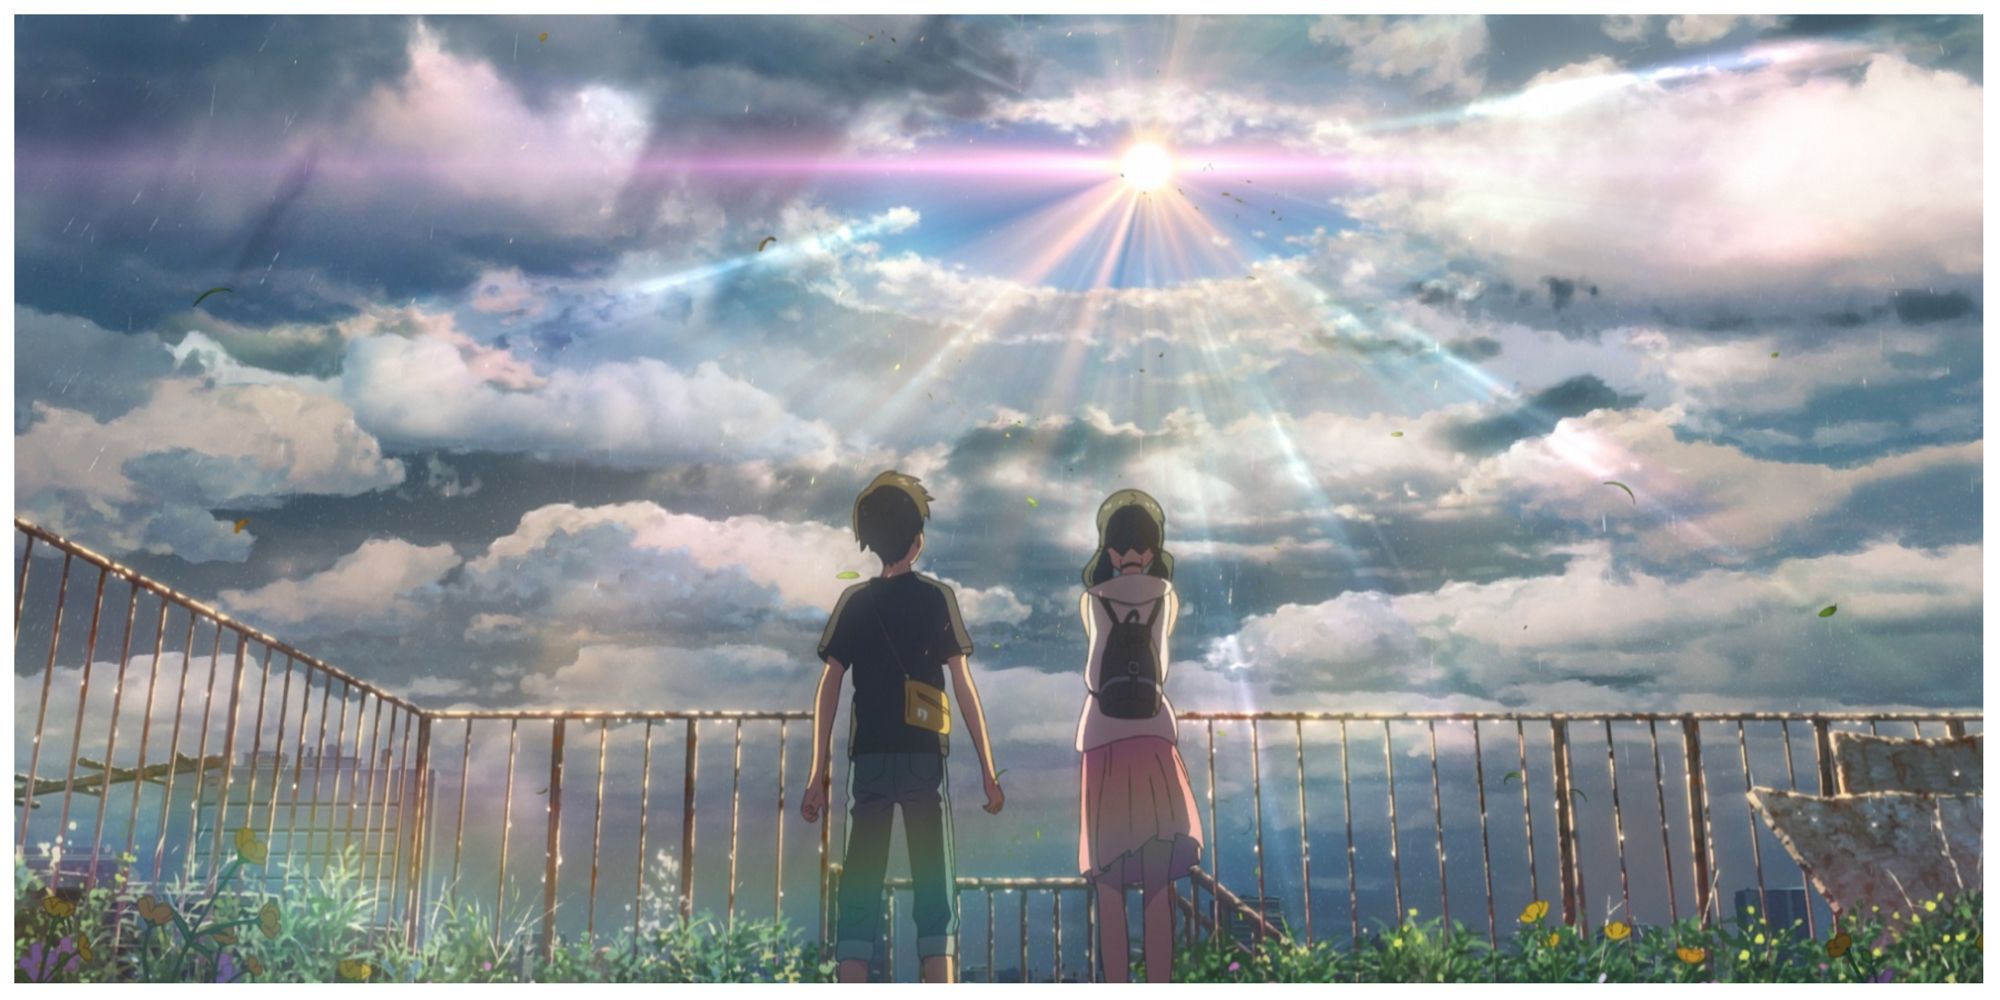 Hodaka and Hina looking at the sun in Weathering With You